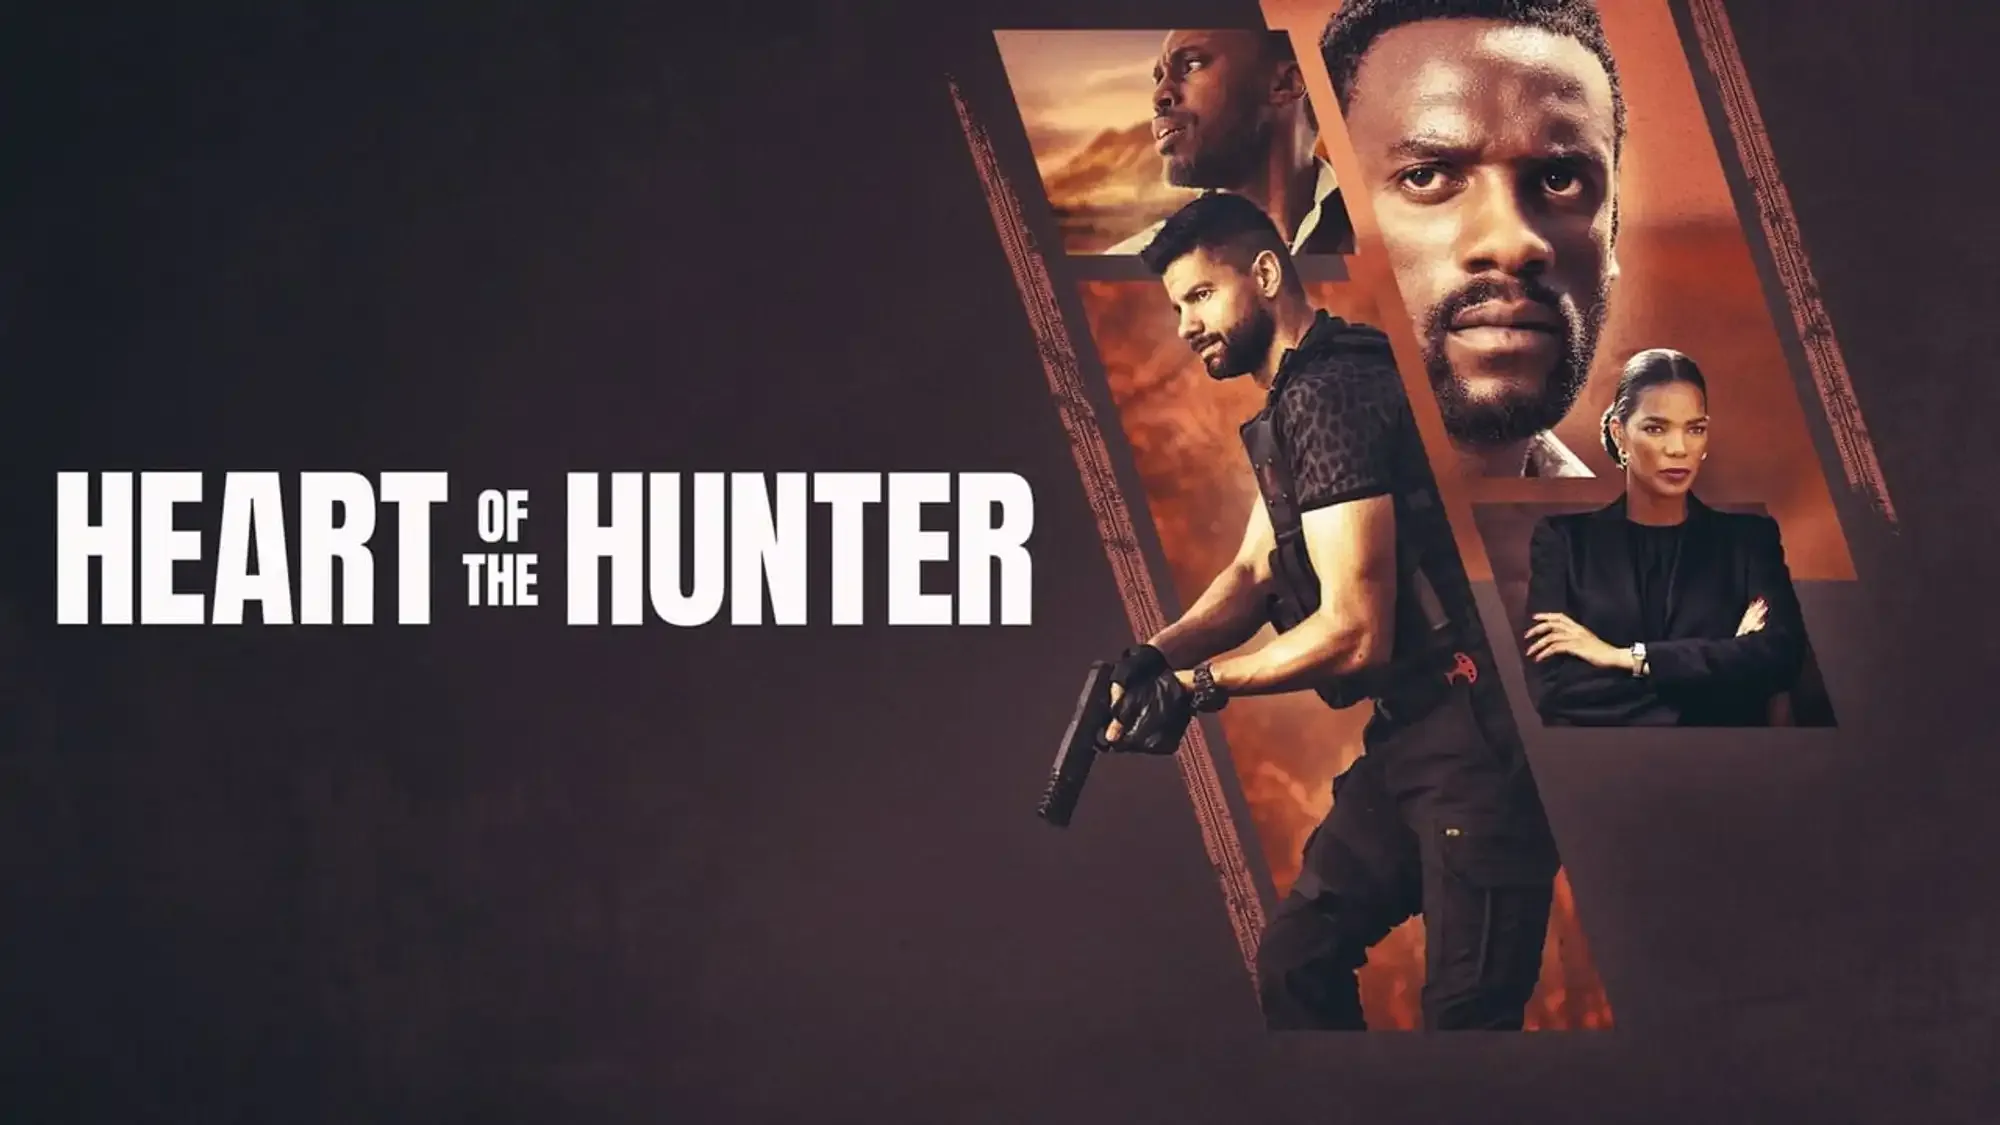 Heart of the Hunter movie review